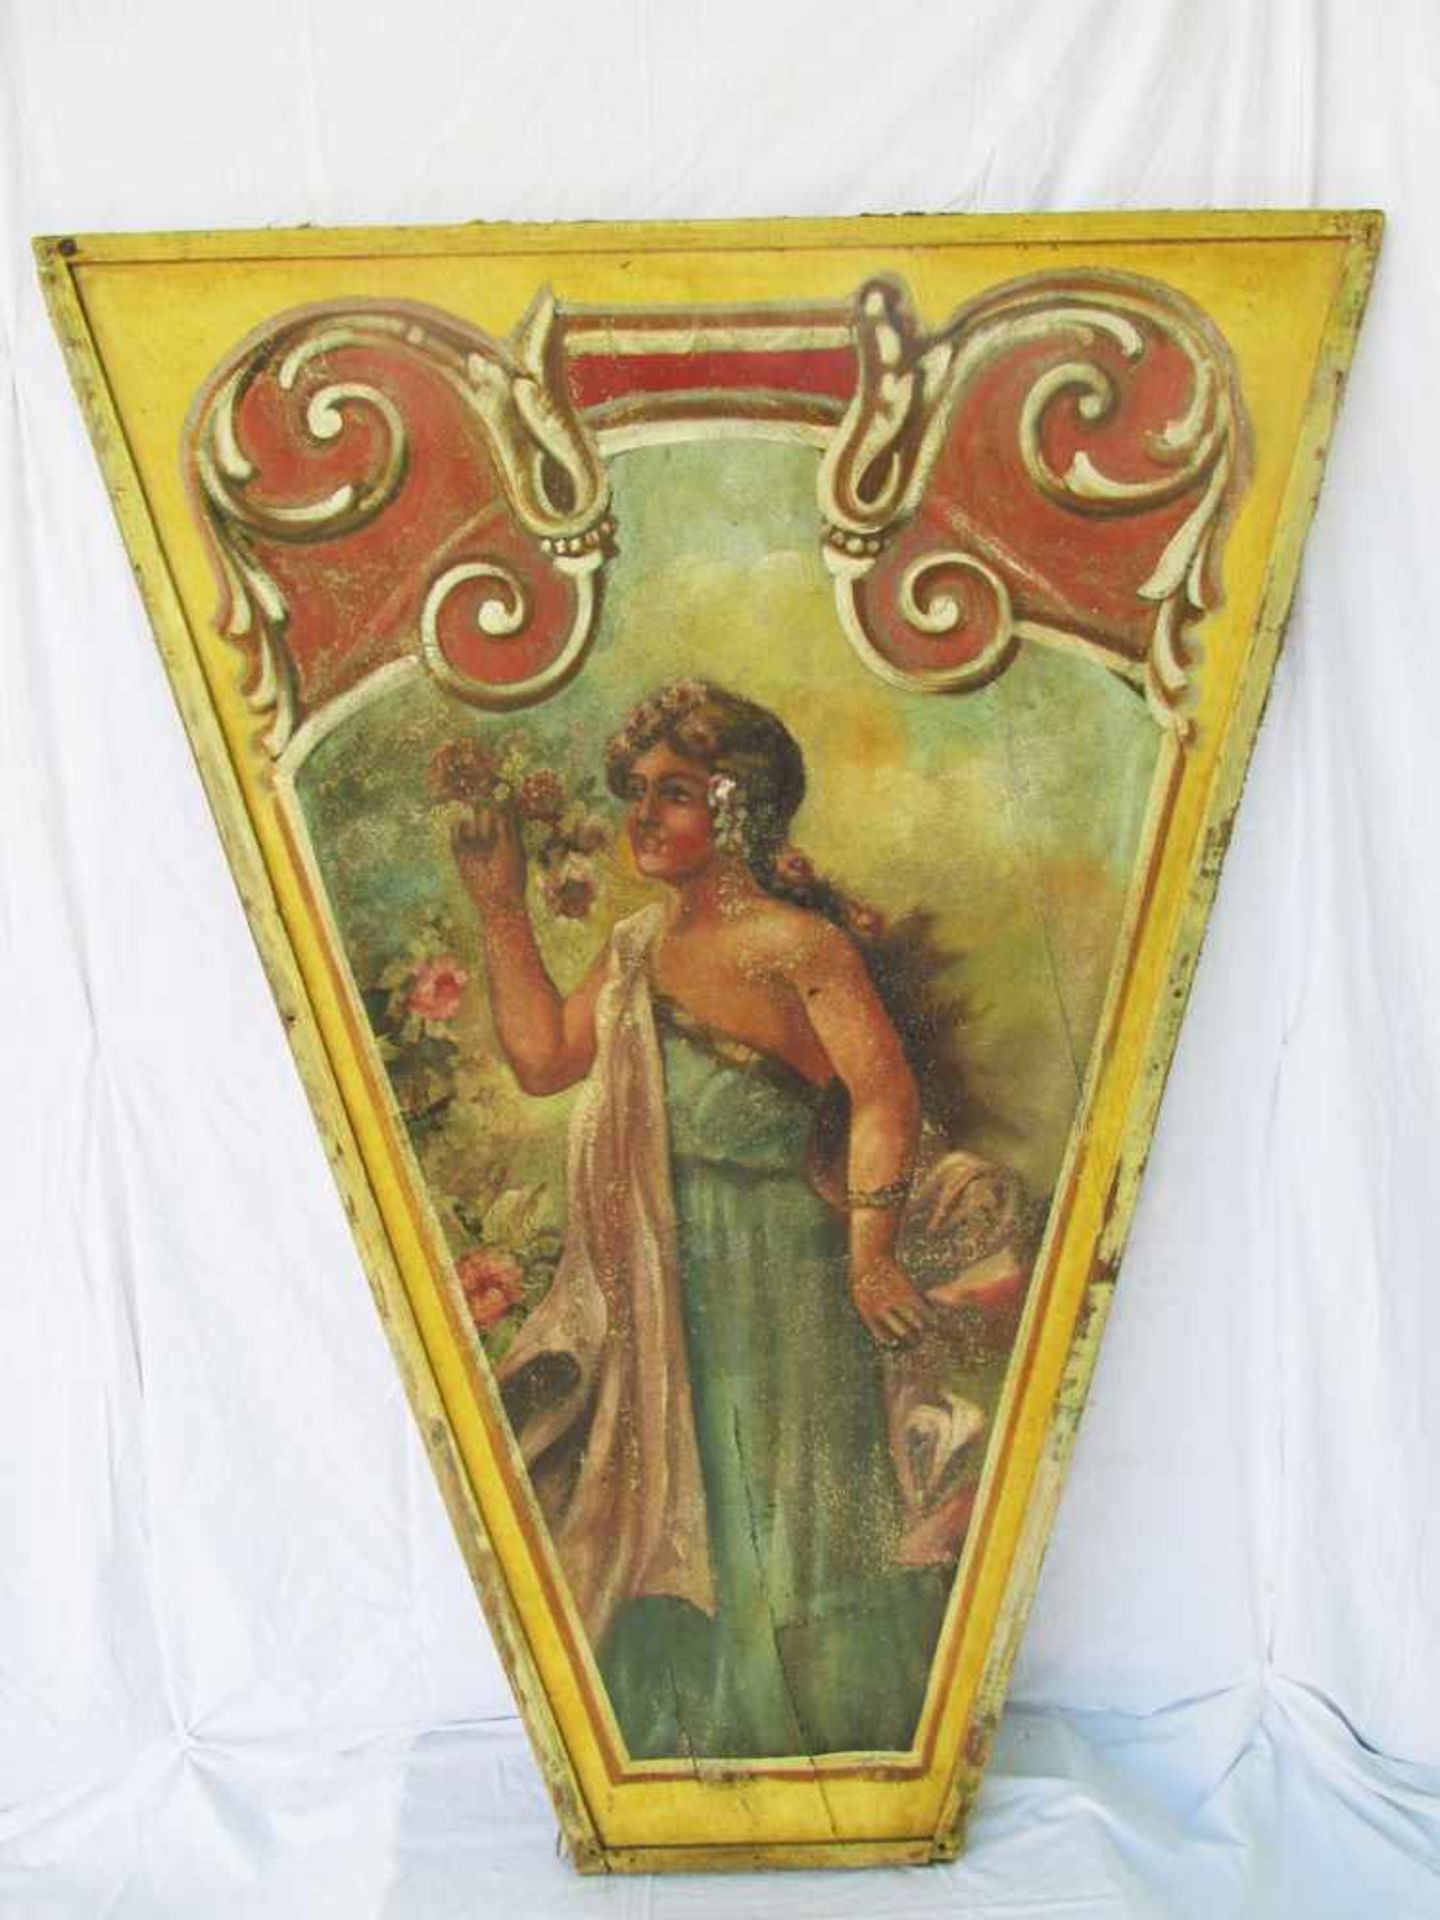 Linen carousel ceiling panelLinen carousel ceiling panel from ca. 1920. Good condition. 184 x 147